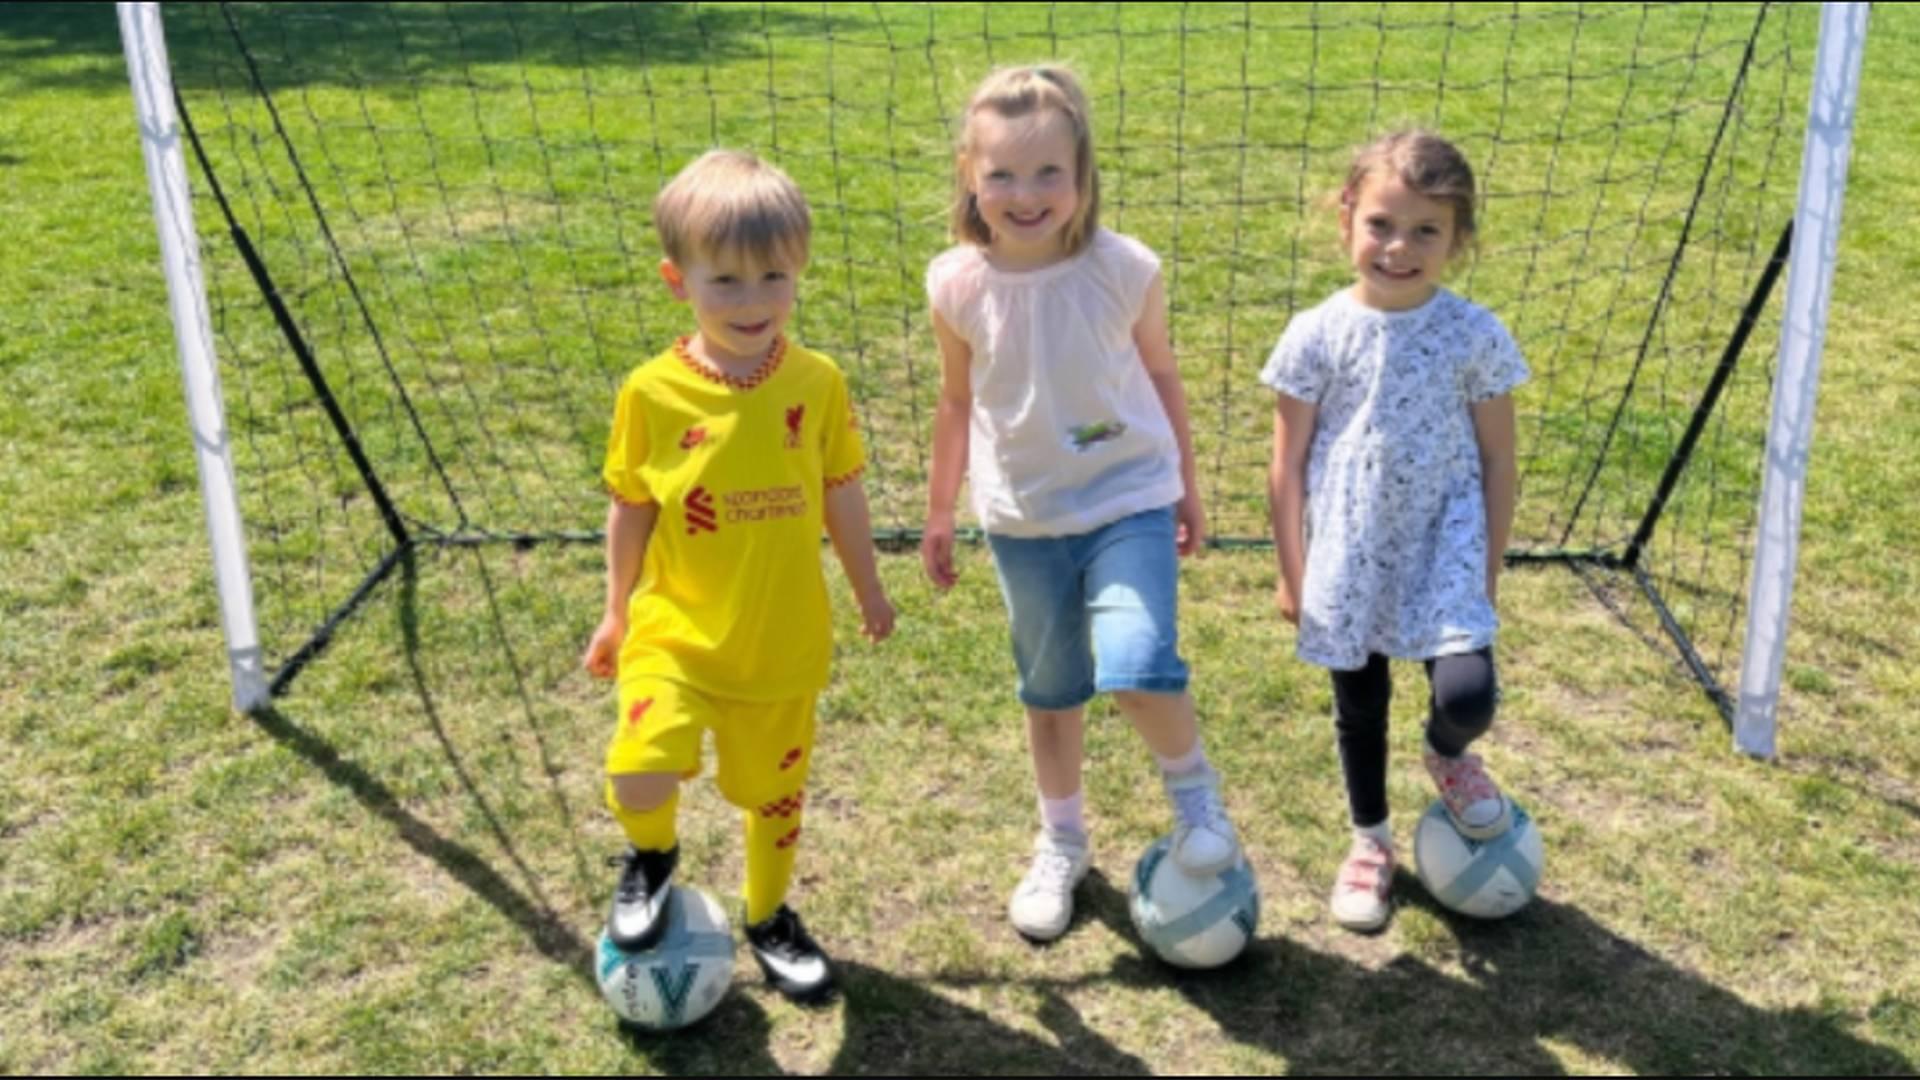 Football class for children aged 18 months to 2.5 years photo